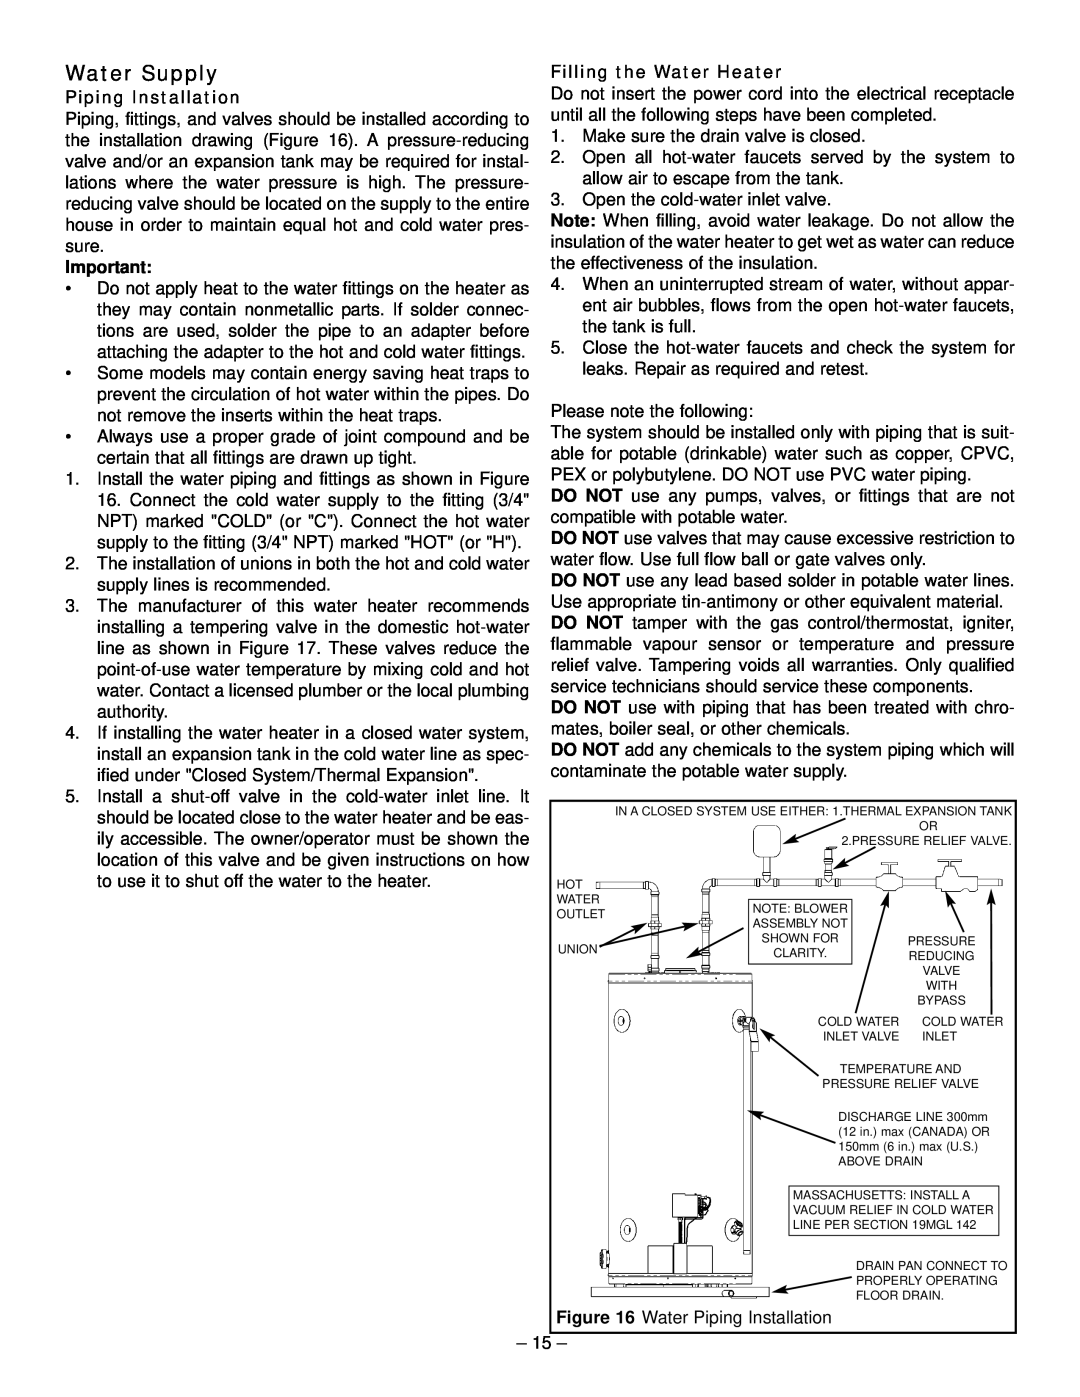 GSW 319594-000 manual Water Supply, Filling the Water Heater, Piping Installation 